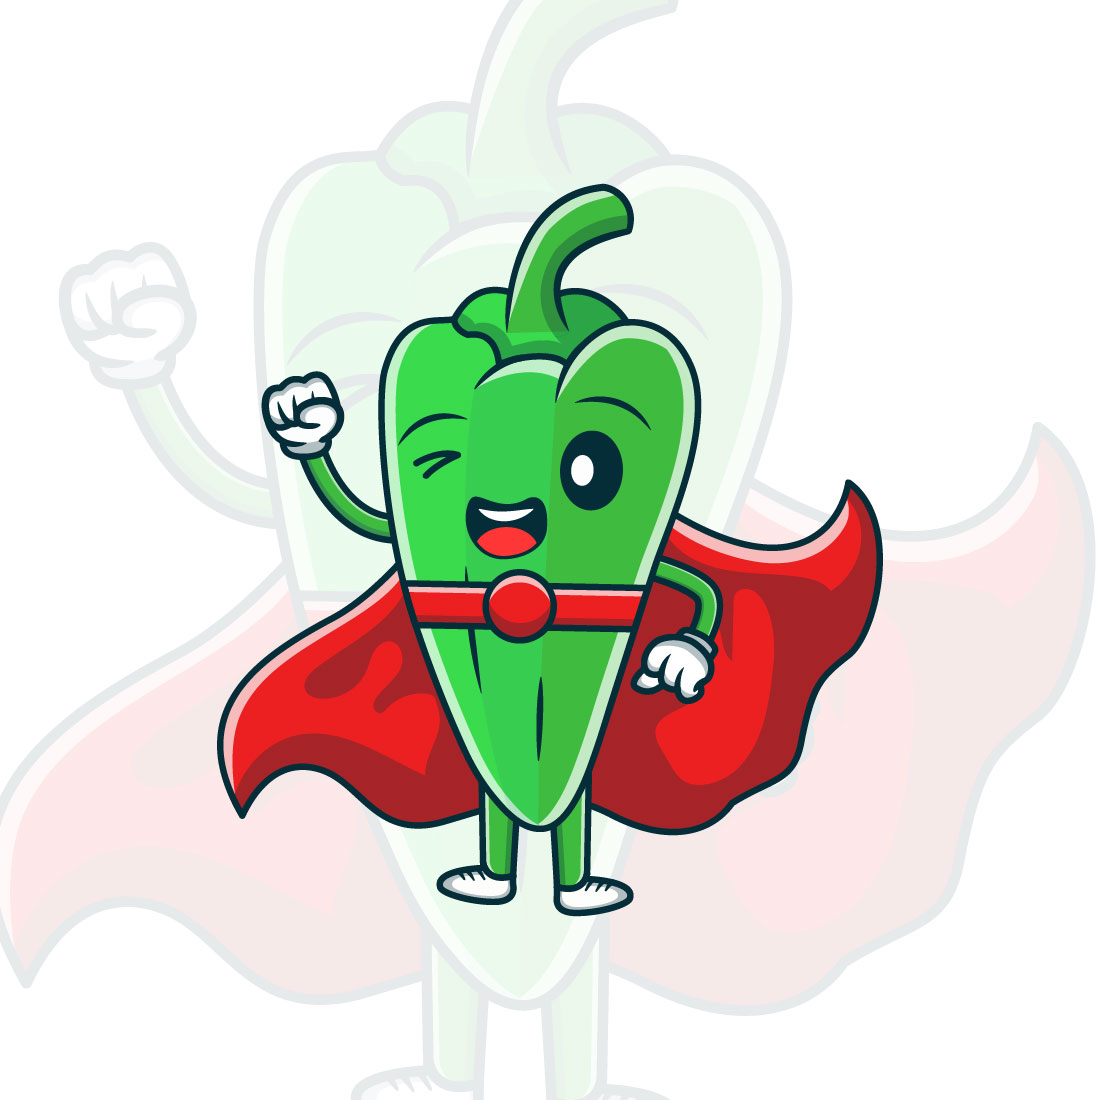 Cute green chili super hero cartoon characters vector icon illustration preview image.